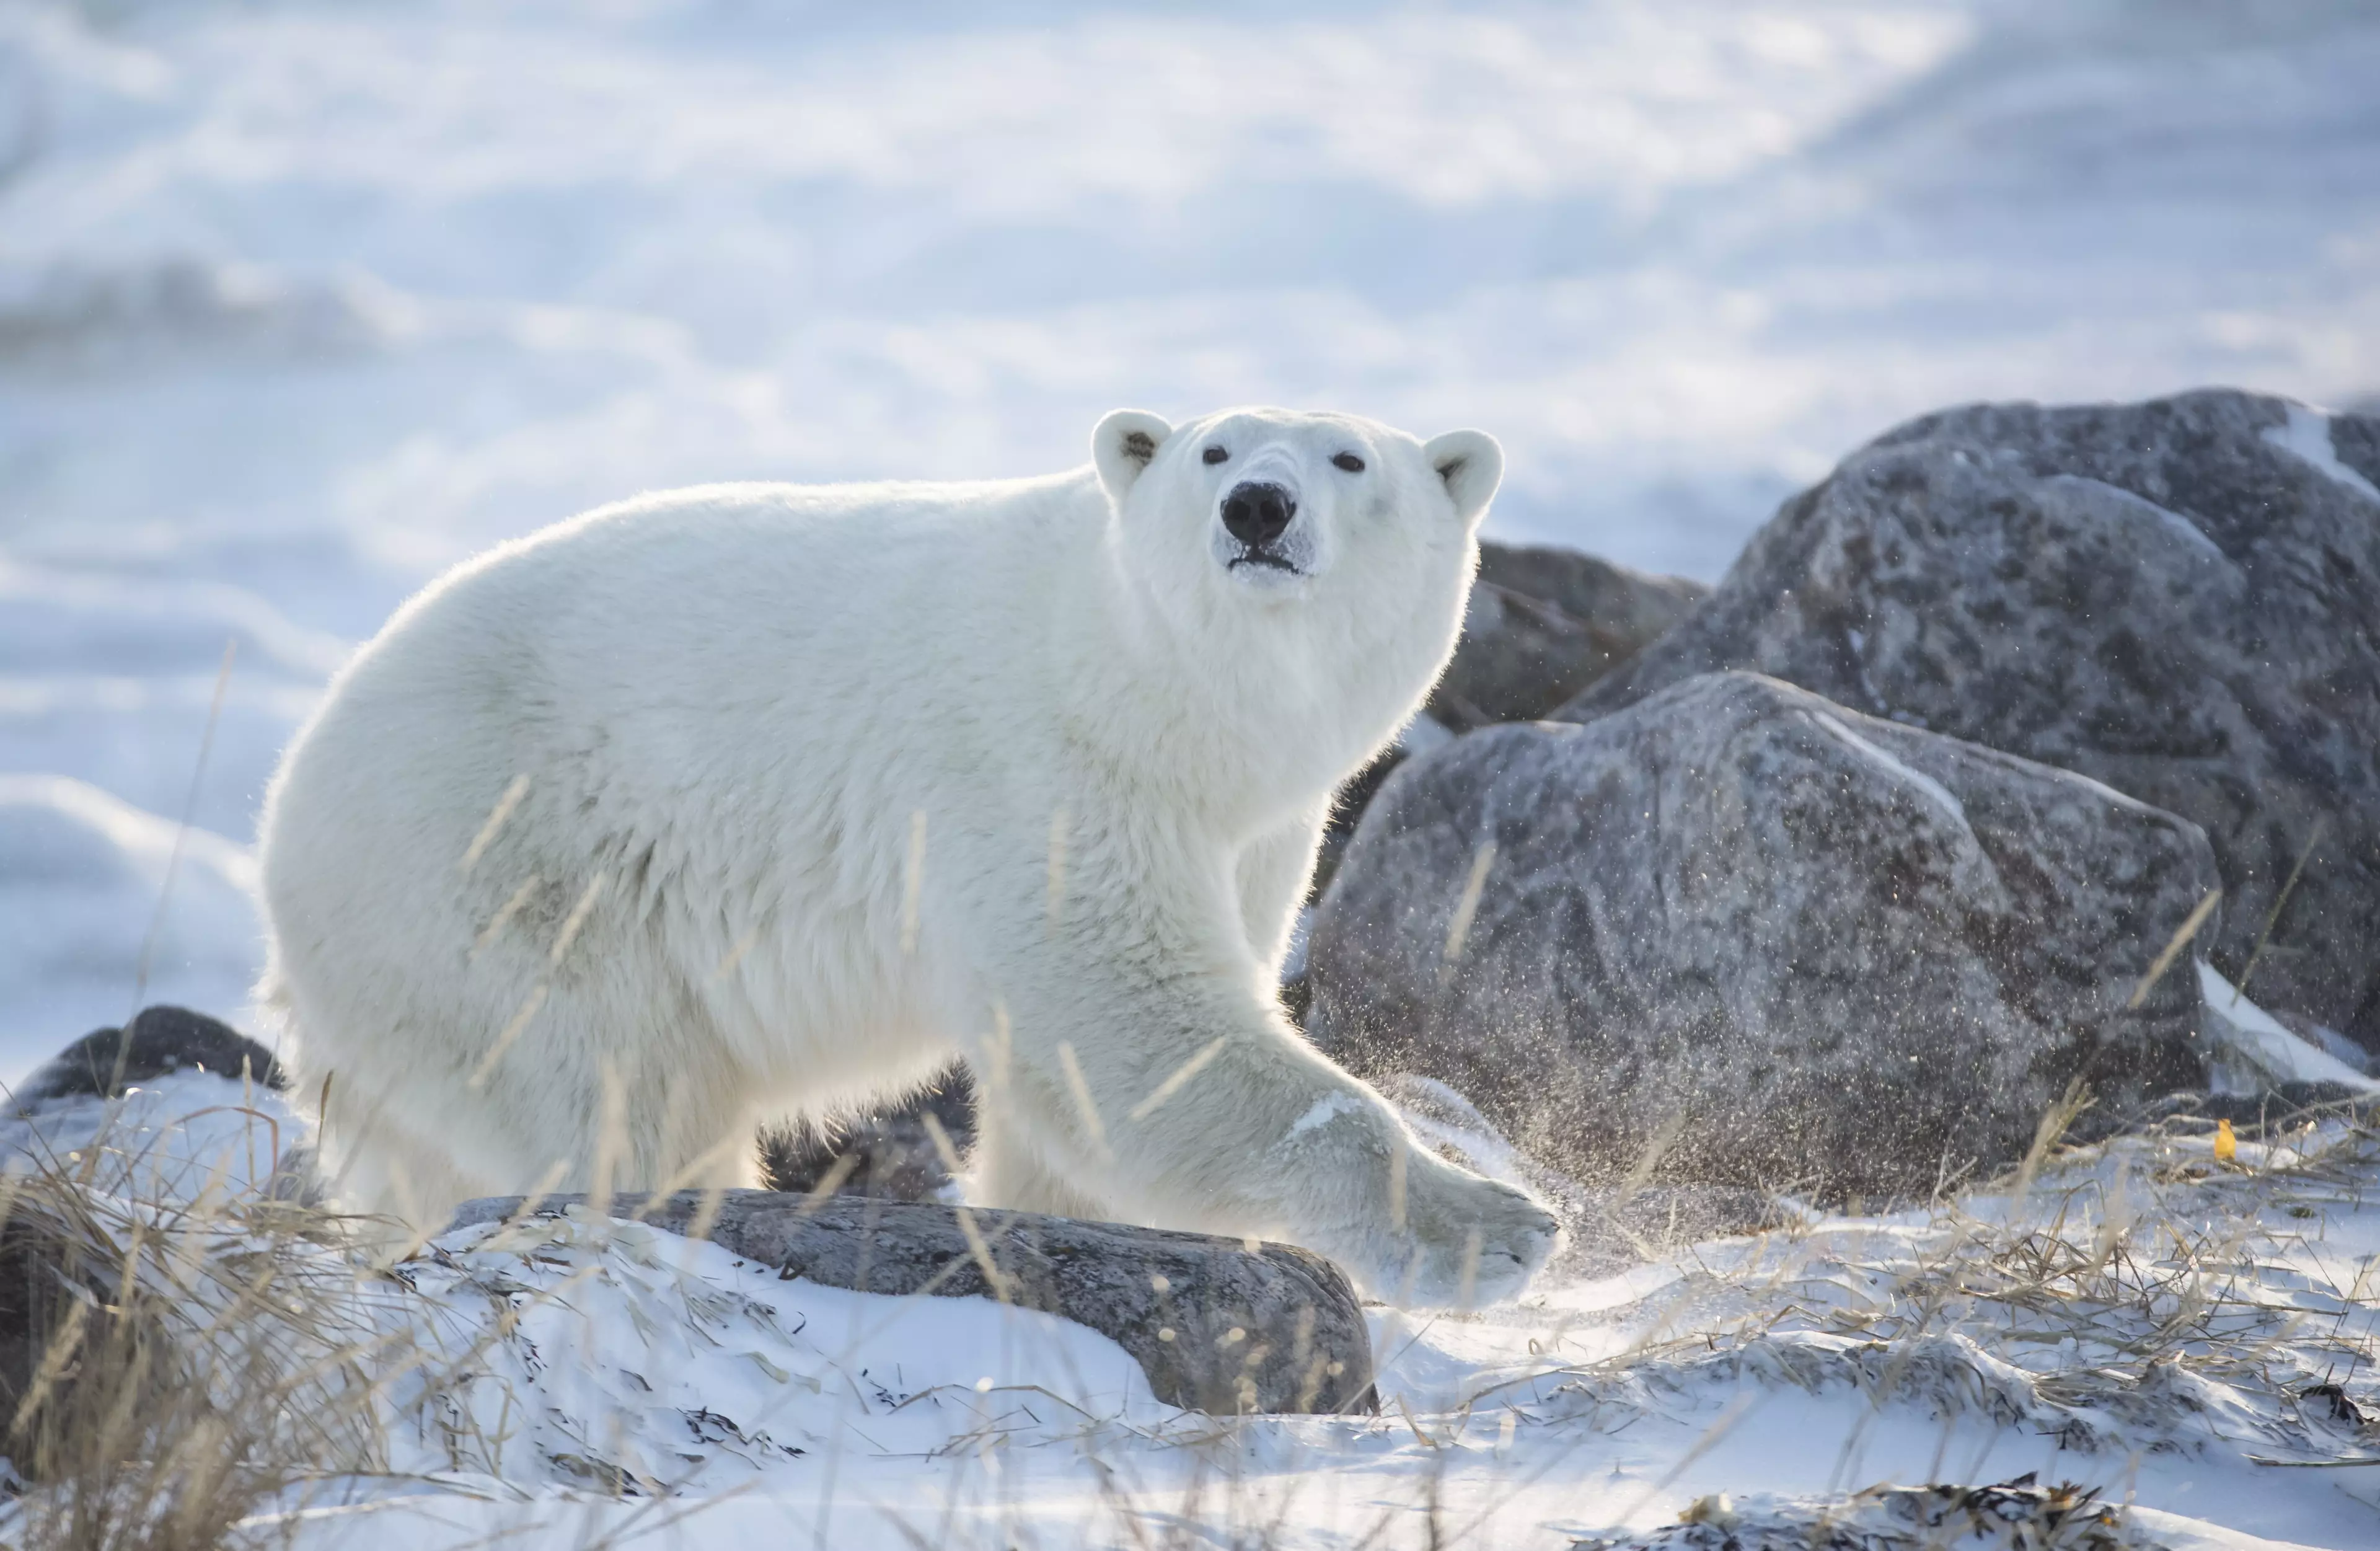 Trophy hunting needs to be banned if polar bears are to avoid extinction, a conservationist has warned.